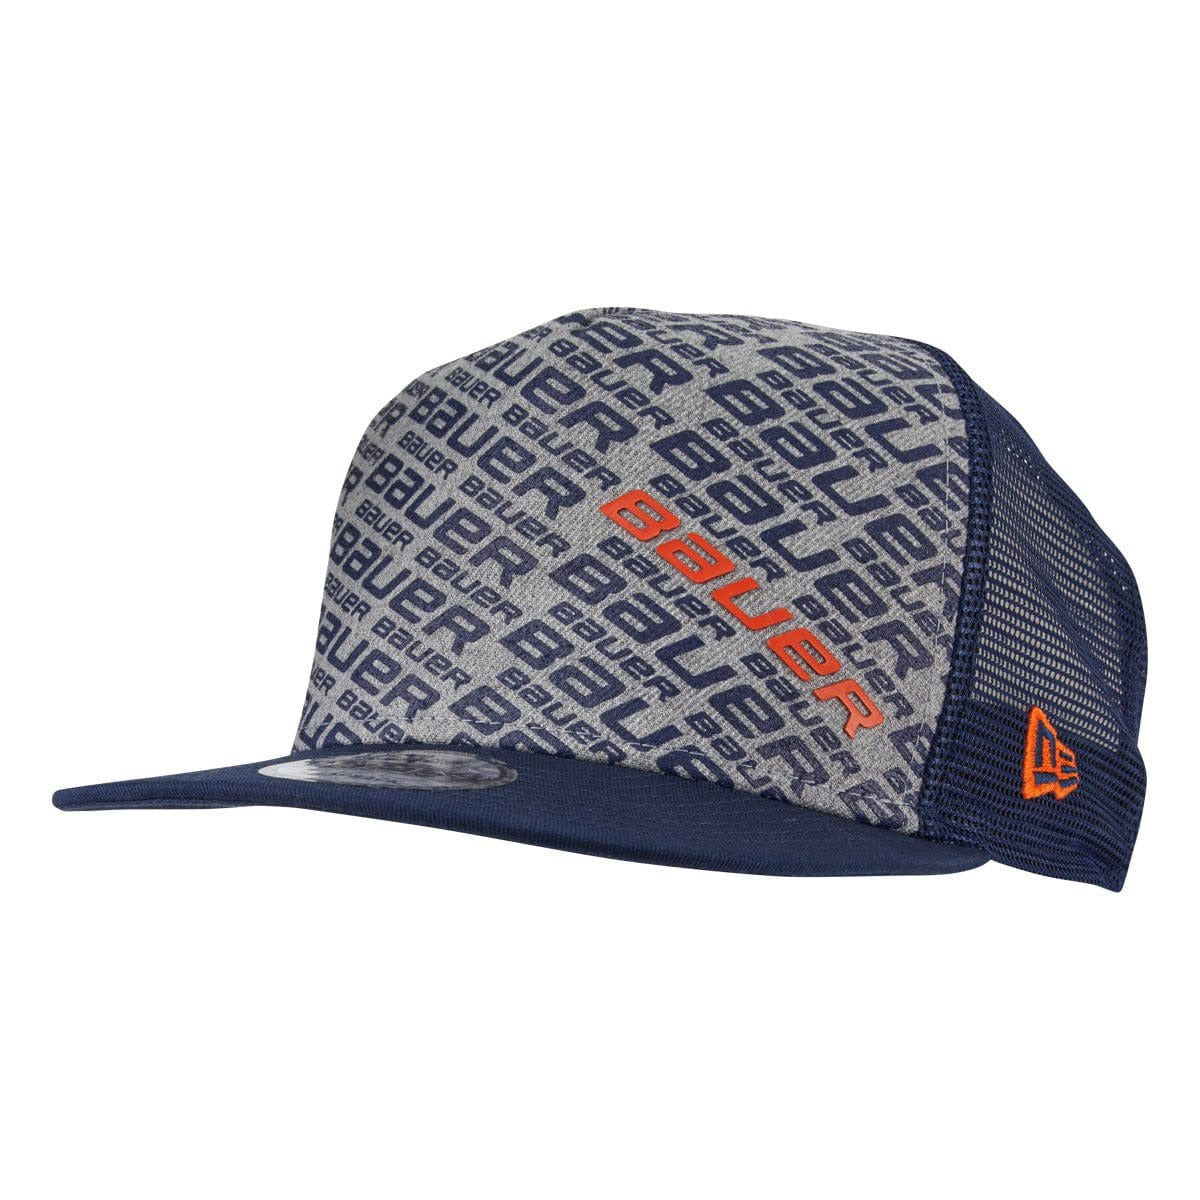 Bauer 9Fifty Youth Snapback Repeat Hat